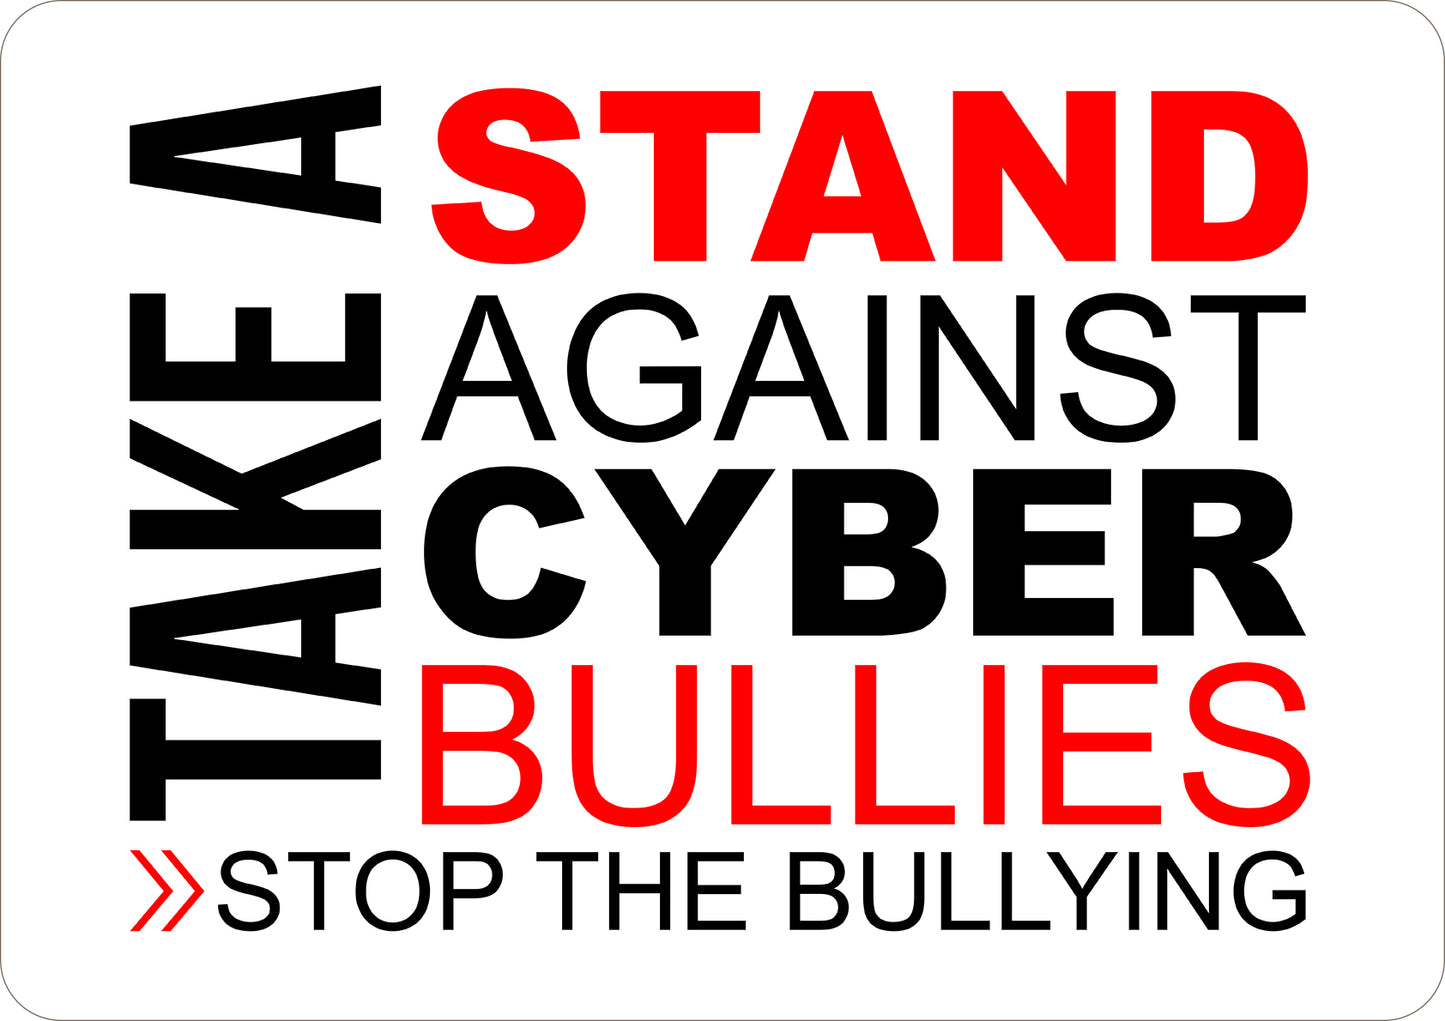 Take A Stand Against Cyber Bullies Printed Sign